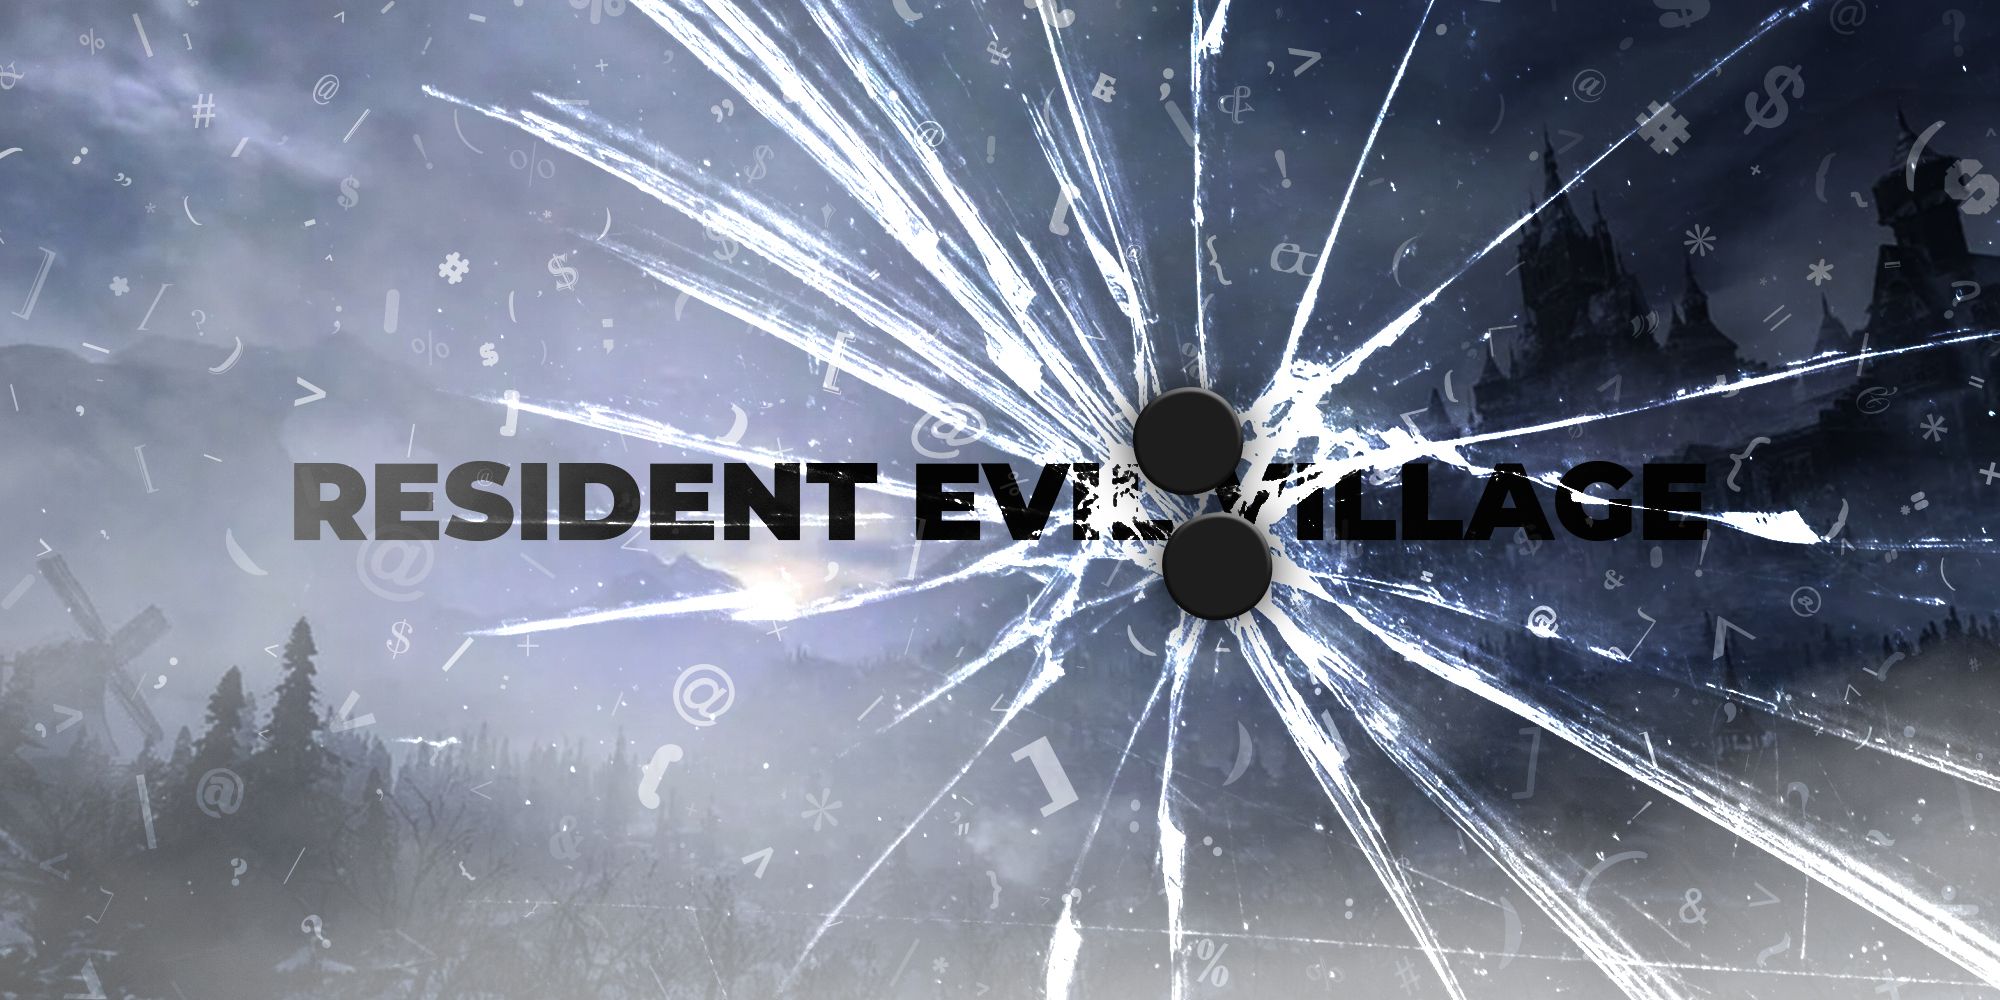 Resident Evil Village logo image with a two large dots that look like a colon hitting the screen like bullet holes, making the glass spiderweb